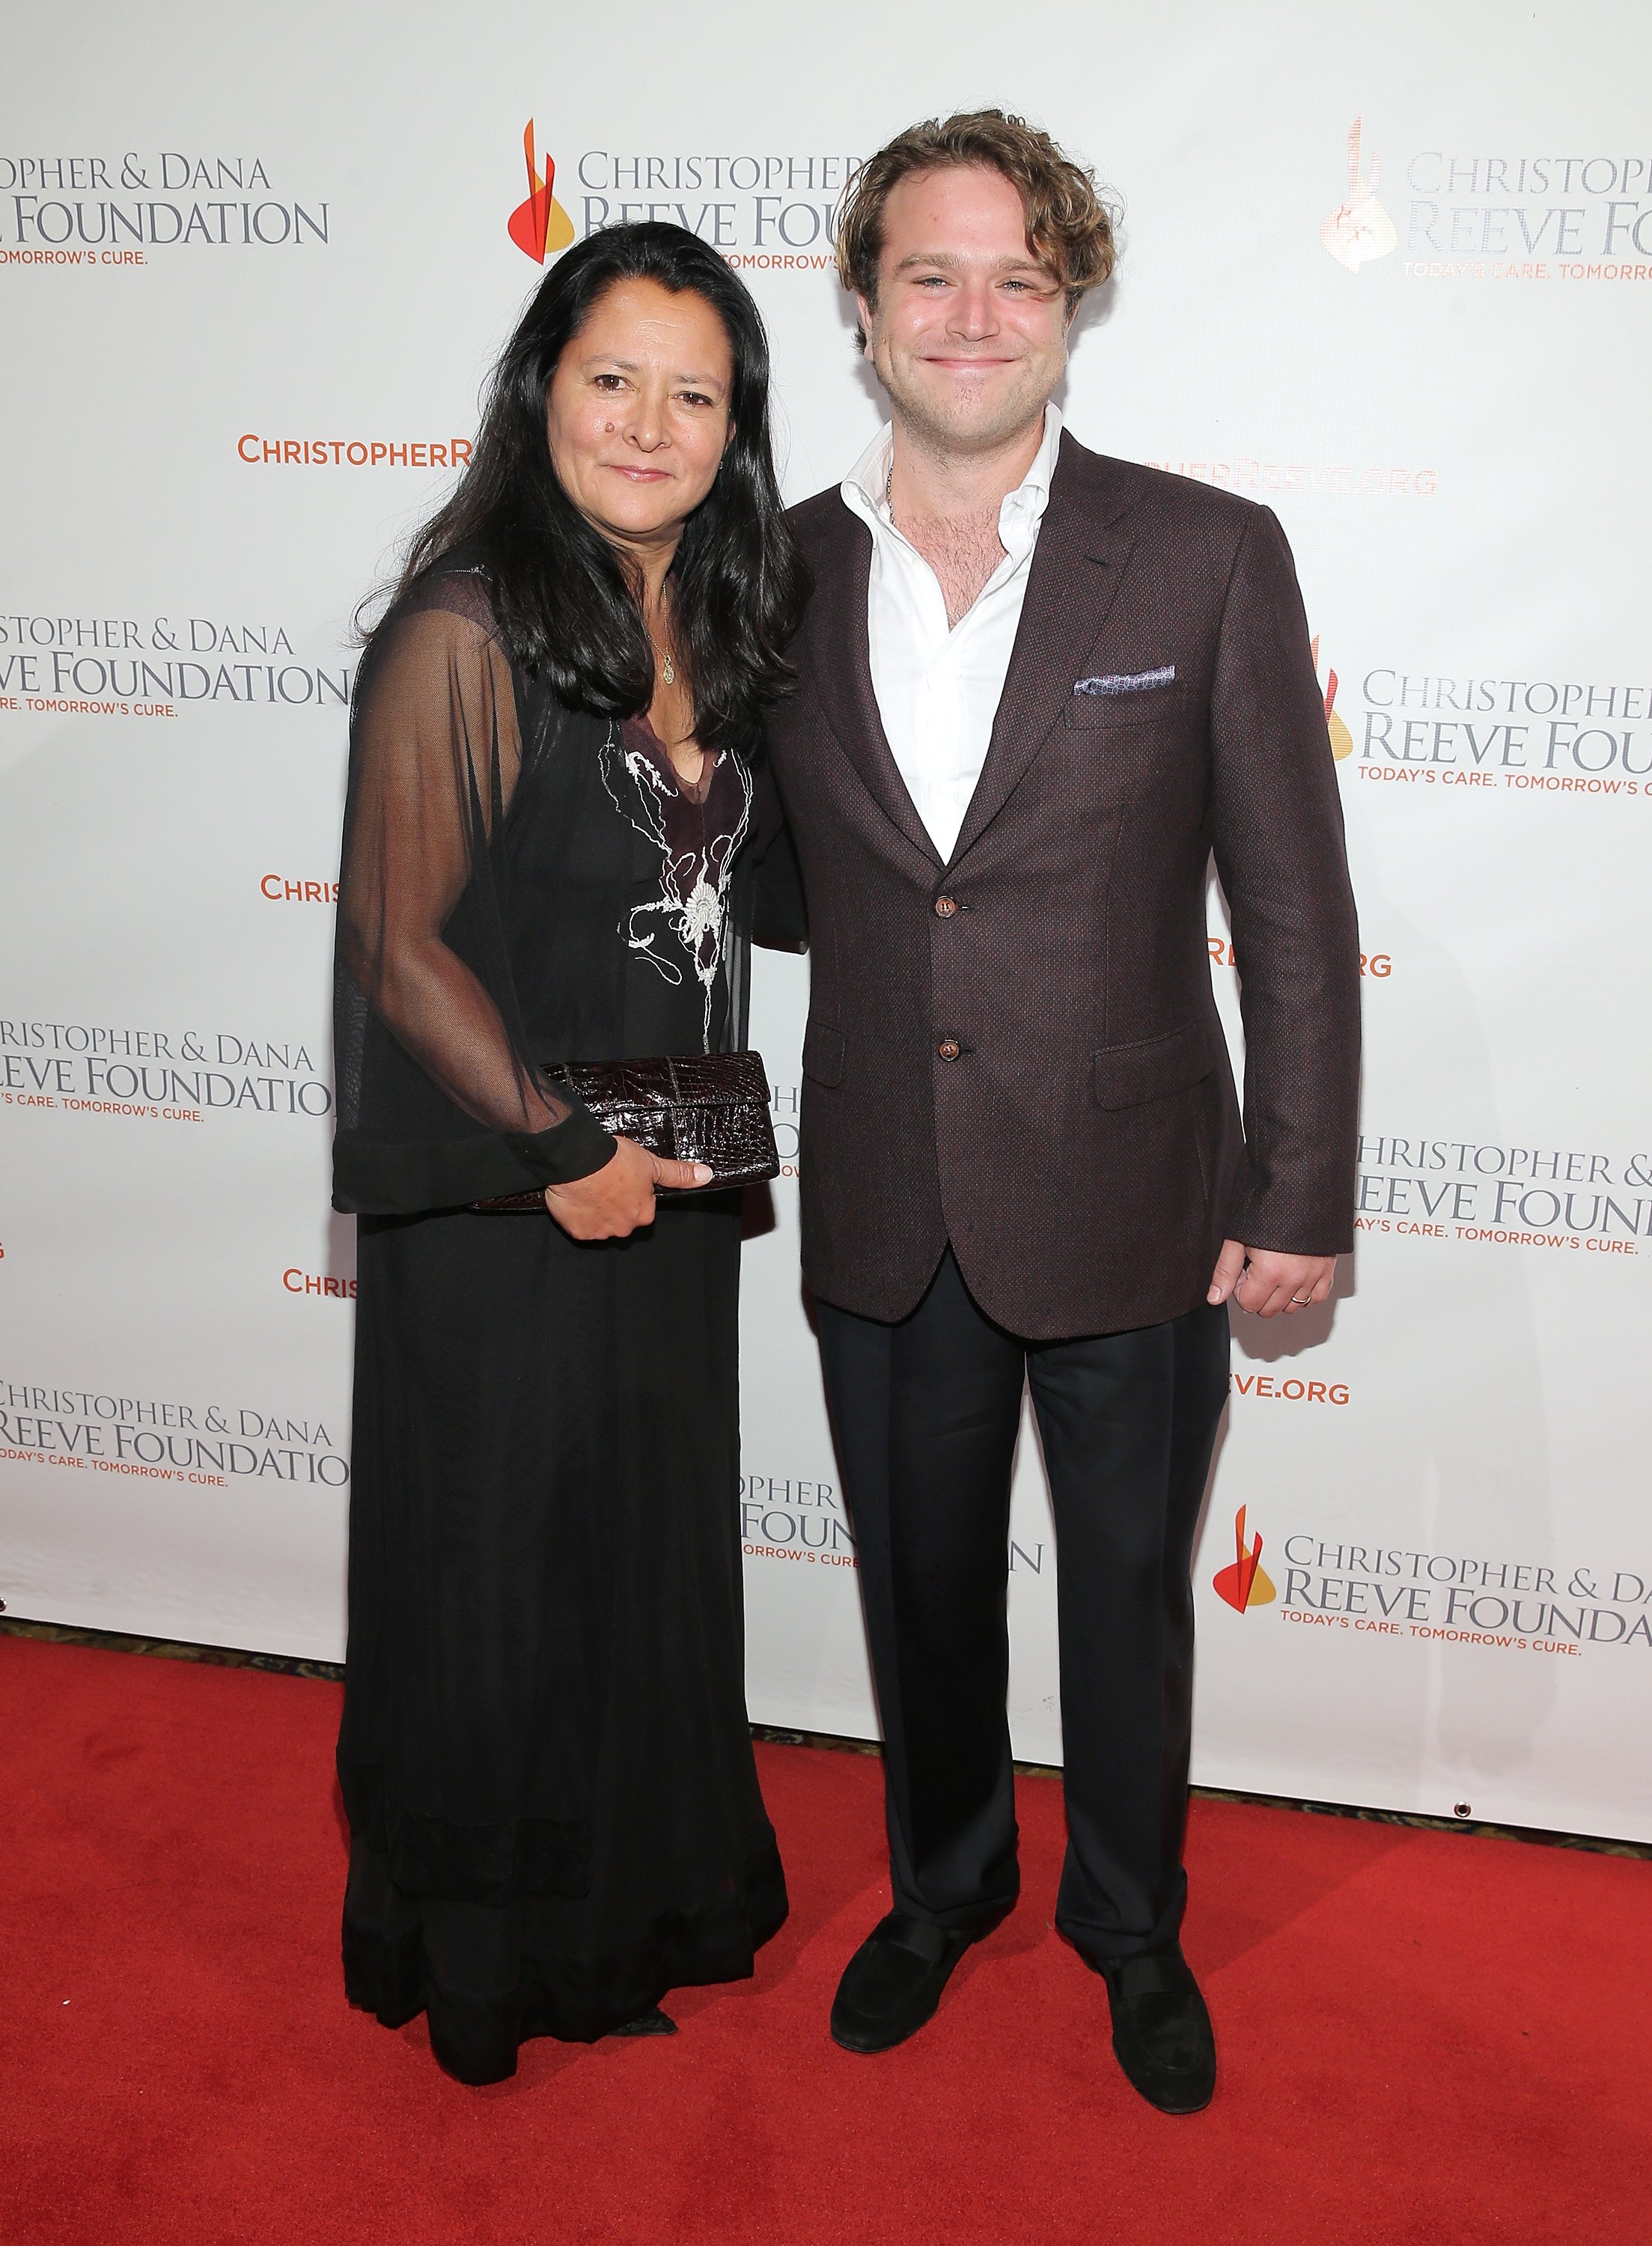 Marsha Garces and Zachary Pym Williams attend The Christopher And Dana Reeve Foundation's "A Magical Evening" Gala at Cipriani Wall Street on November 19, 2015, New York City. | Source: Getty Images